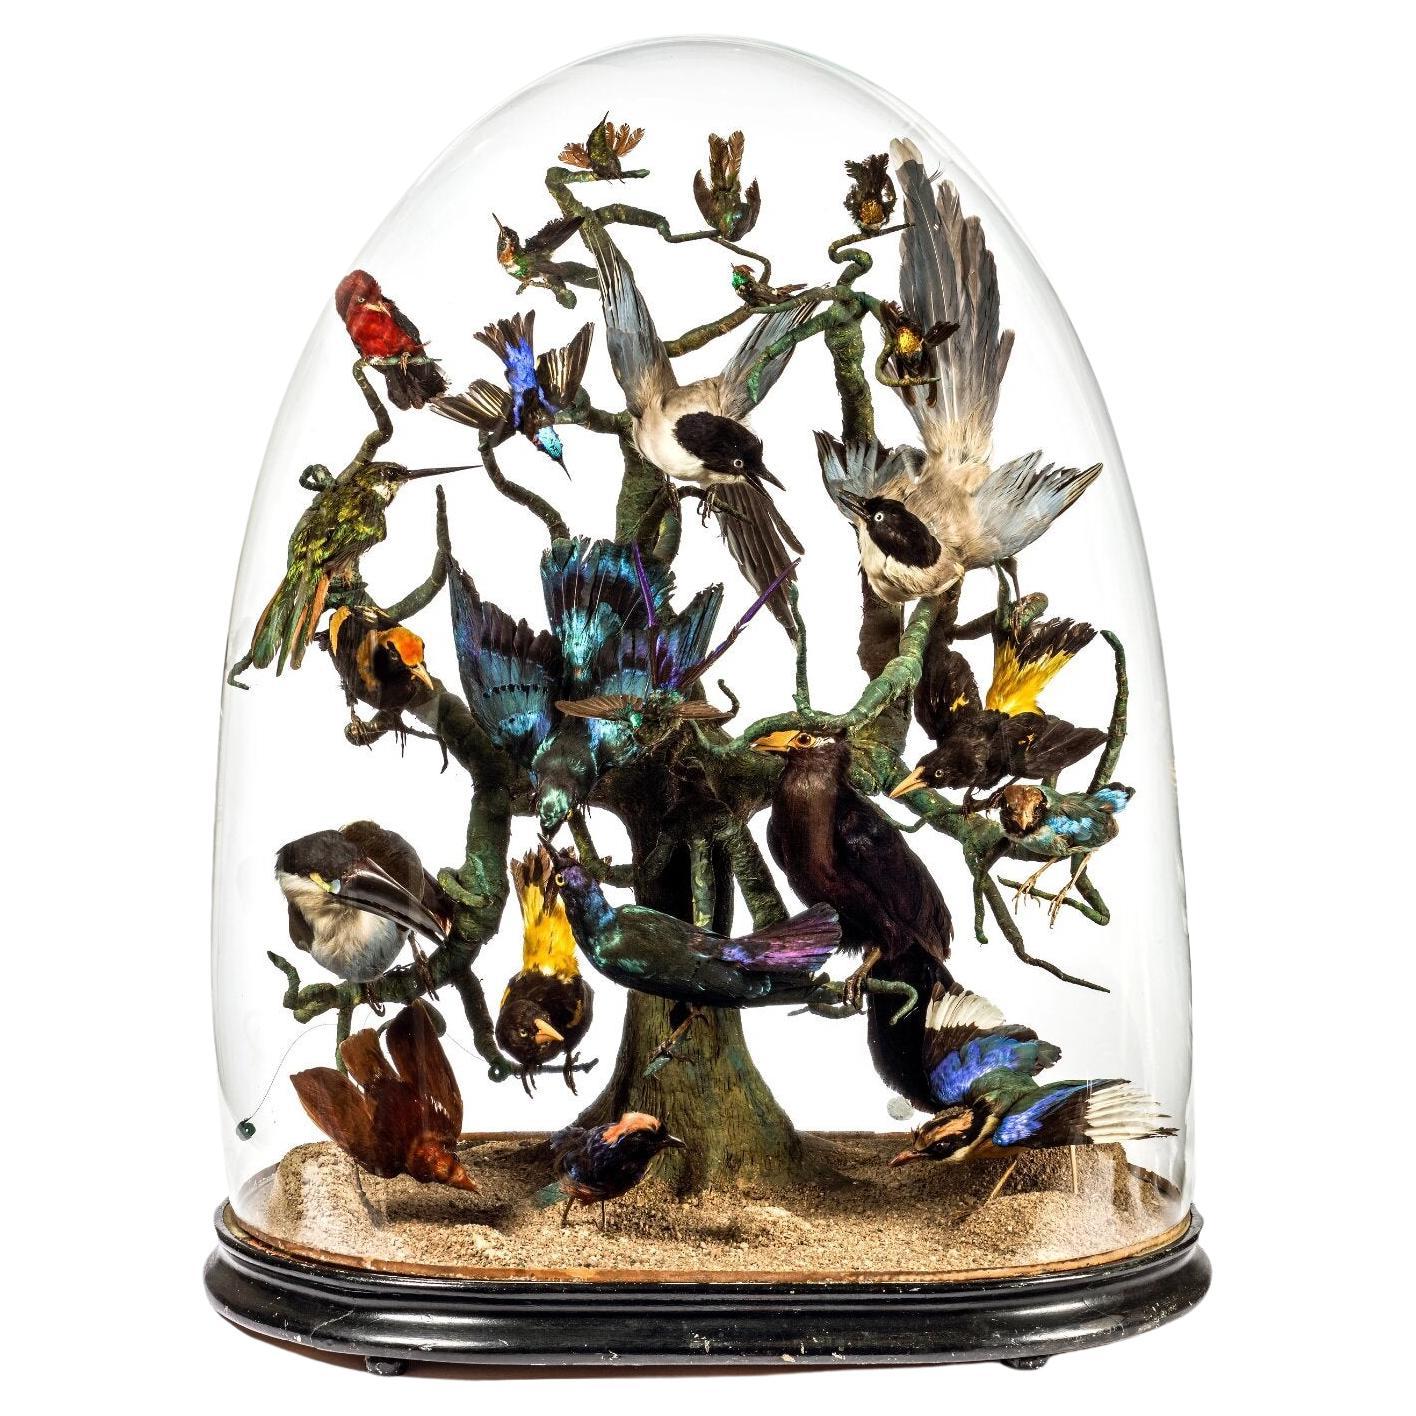 Huge Monumental Victorian Taxidermy Dome with Colorfull Tropical Birds, C. 1850